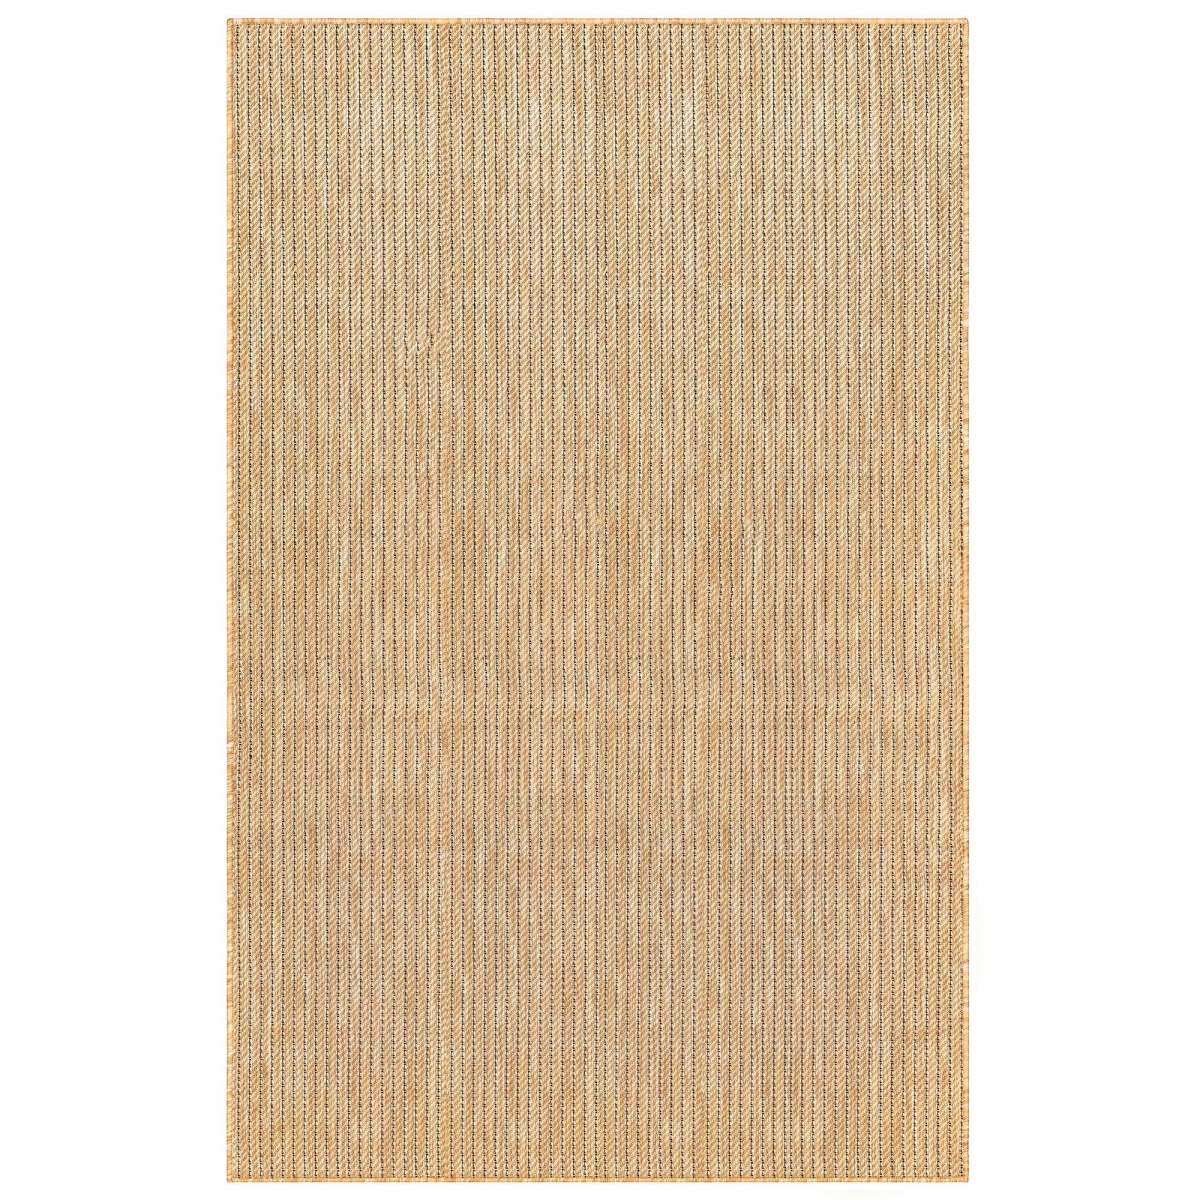 Trans-ocean Imports Cre45842212 39 In. X 59 In. Liora Manne Carmel Texture Stripe Indoor & Outdoor Wilton Woven Rectangle Rug - Sand